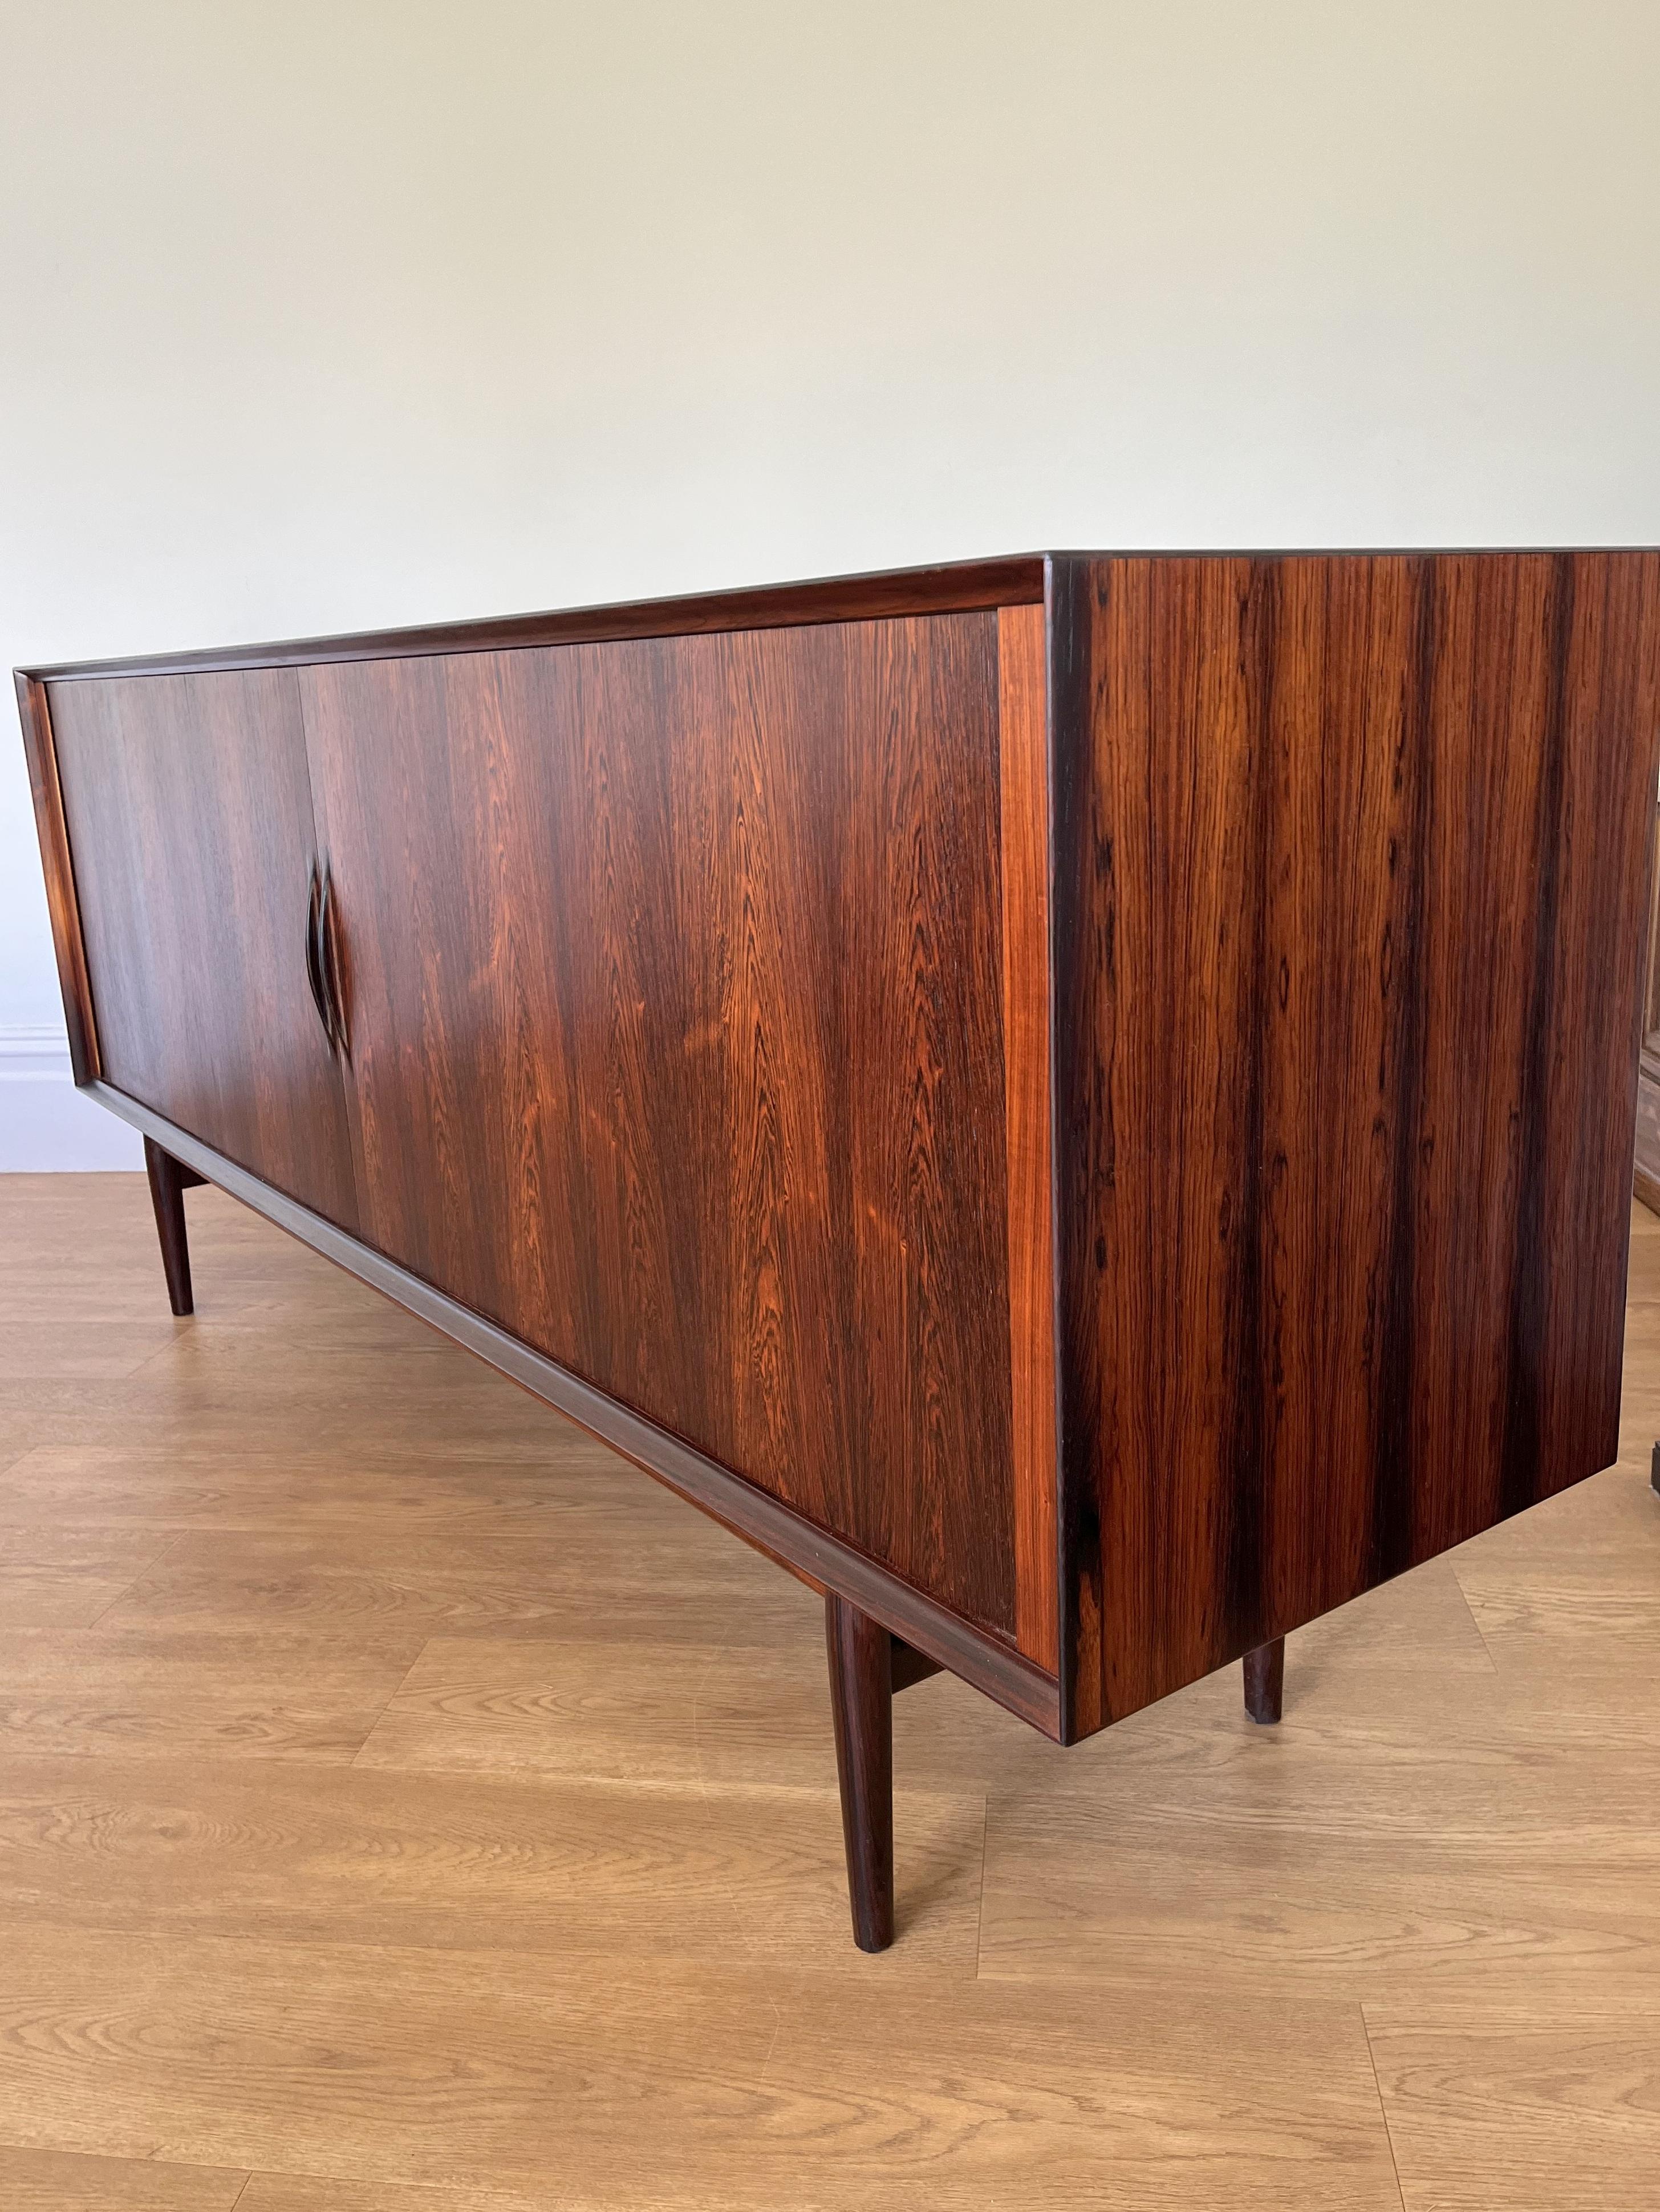 Rosewood veneered, sideboard designed by Arne Vodder for Sibast, Denmark.

The sideboard features sliding tambour doors with beautifully crafted carved handles and sits on 4 solid rosewood turned legs.

The interior has 3 draws and four